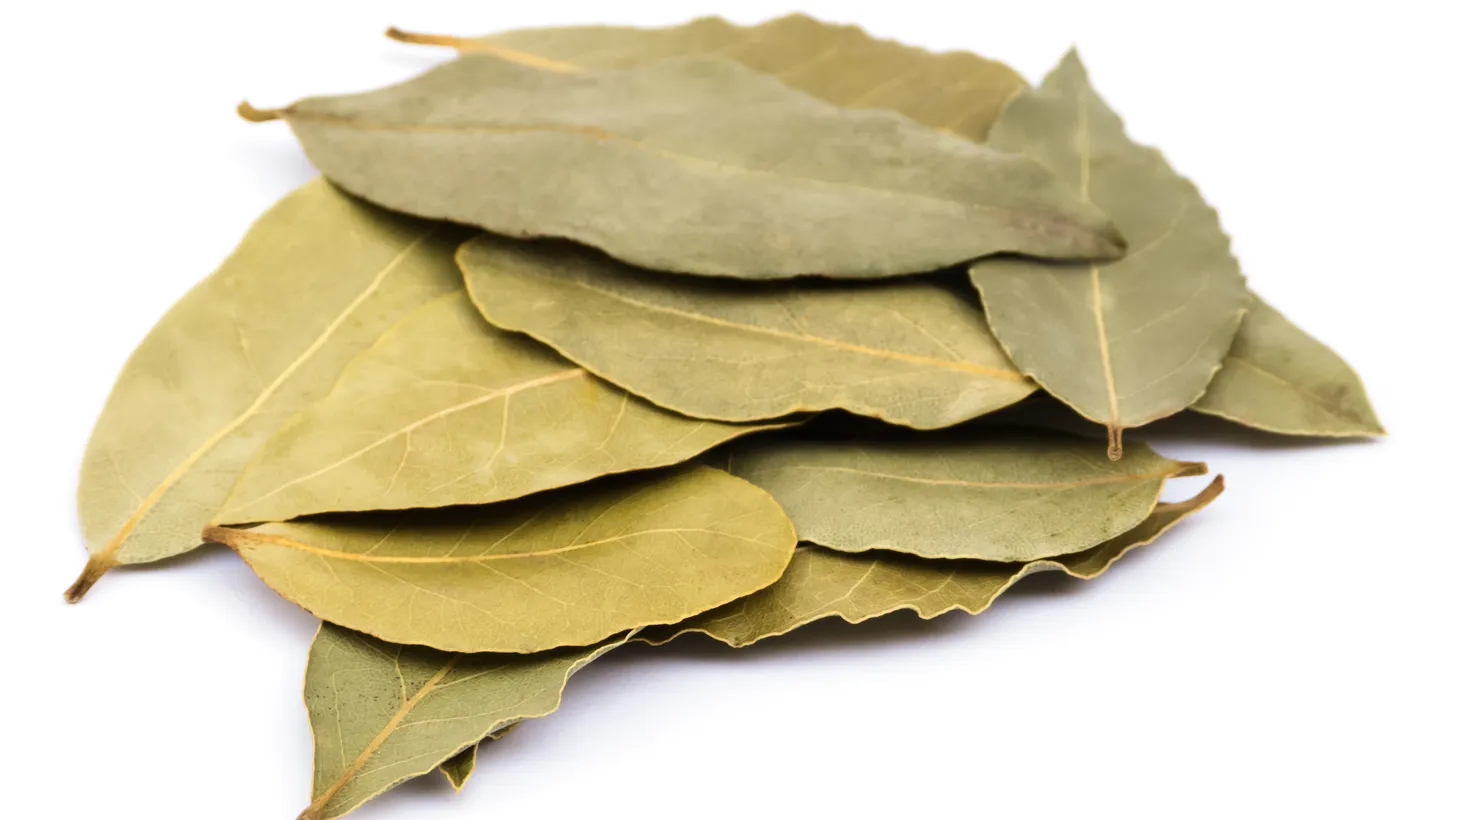 Paula Forbes uses fresh bay leaves that she is able to grow from bay laurel trees in Texas.